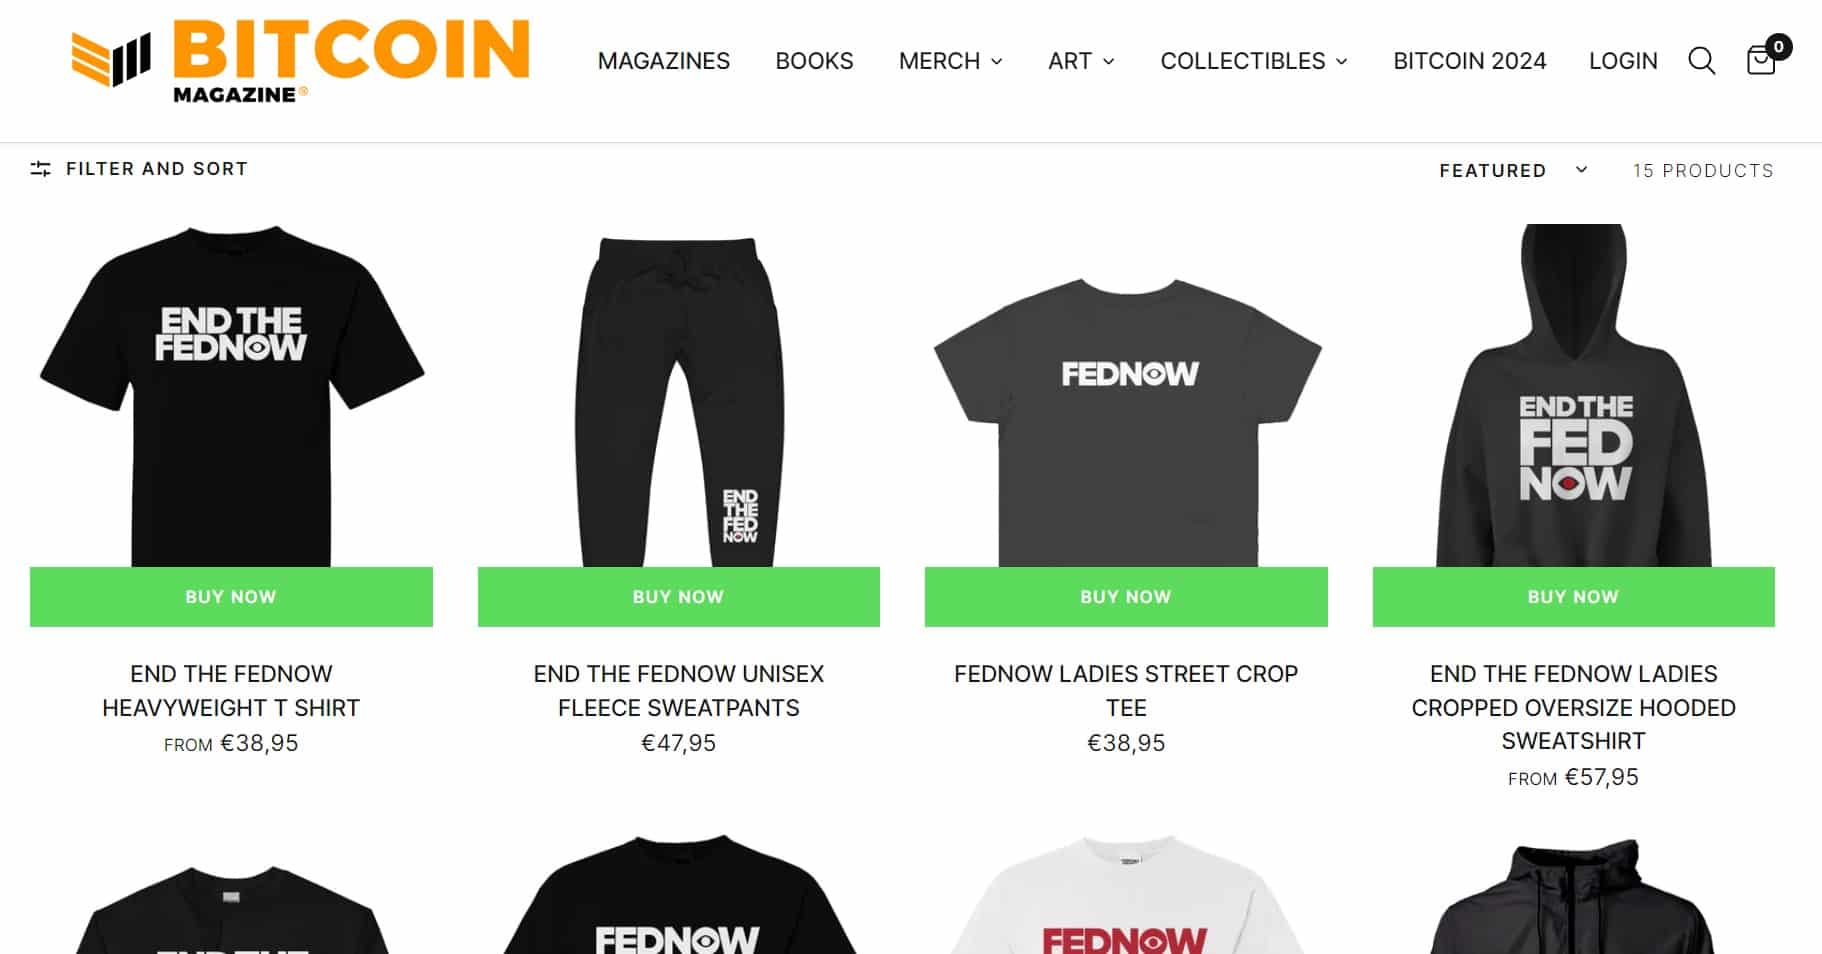 Parody FedNow items marketed by Bitcoin Magazine